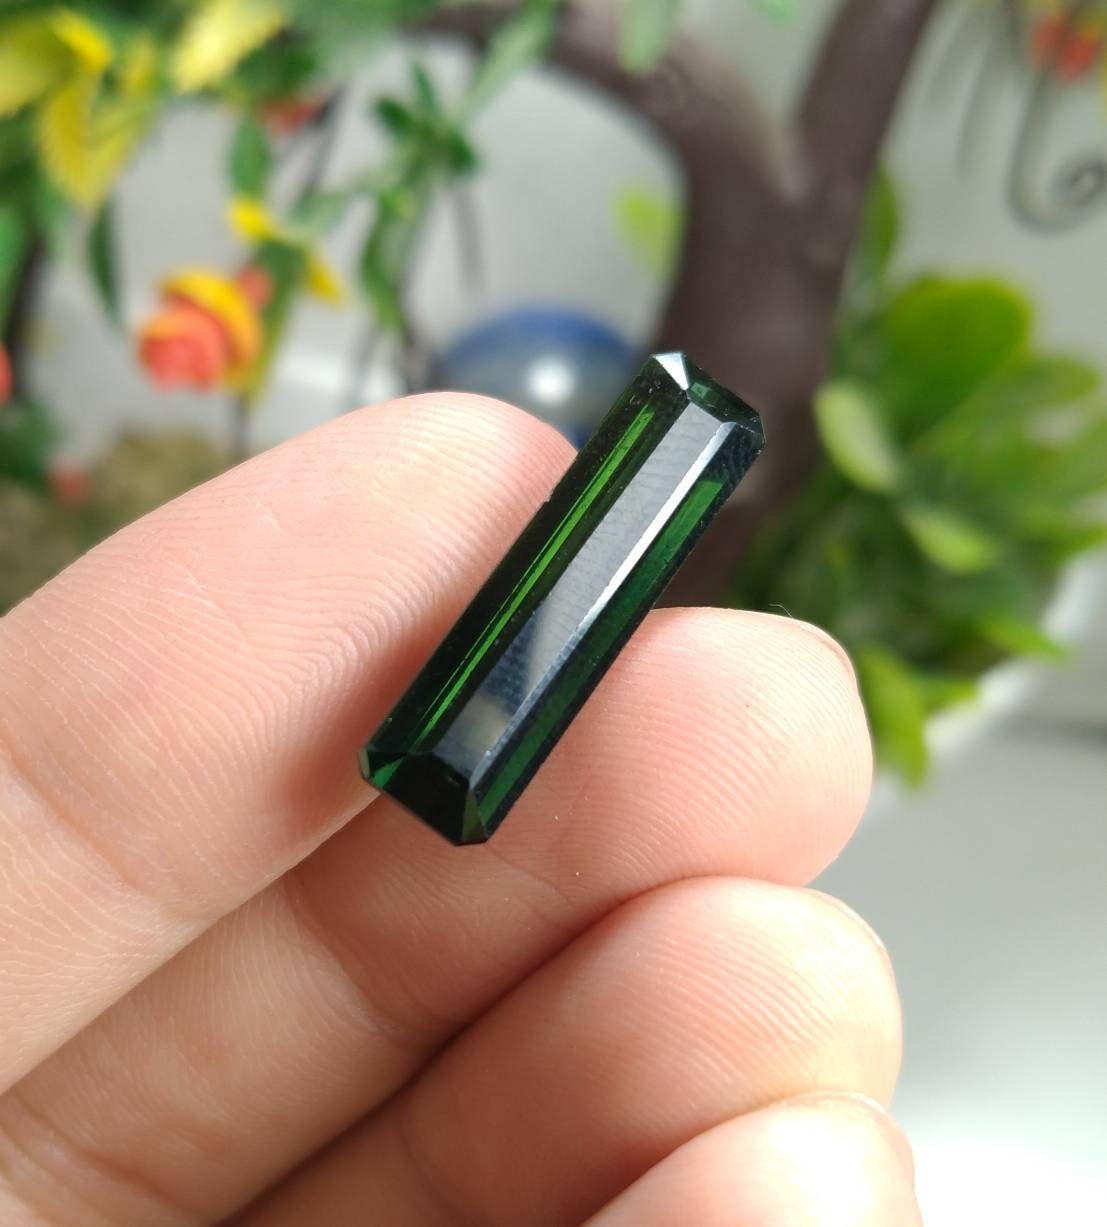 ARSAA GEMS AND MINERALSNatural top quality beautiful 9 carats rectangular shape faceted green tourmaline gem - Premium  from ARSAA GEMS AND MINERALS - Just $90.00! Shop now at ARSAA GEMS AND MINERALS